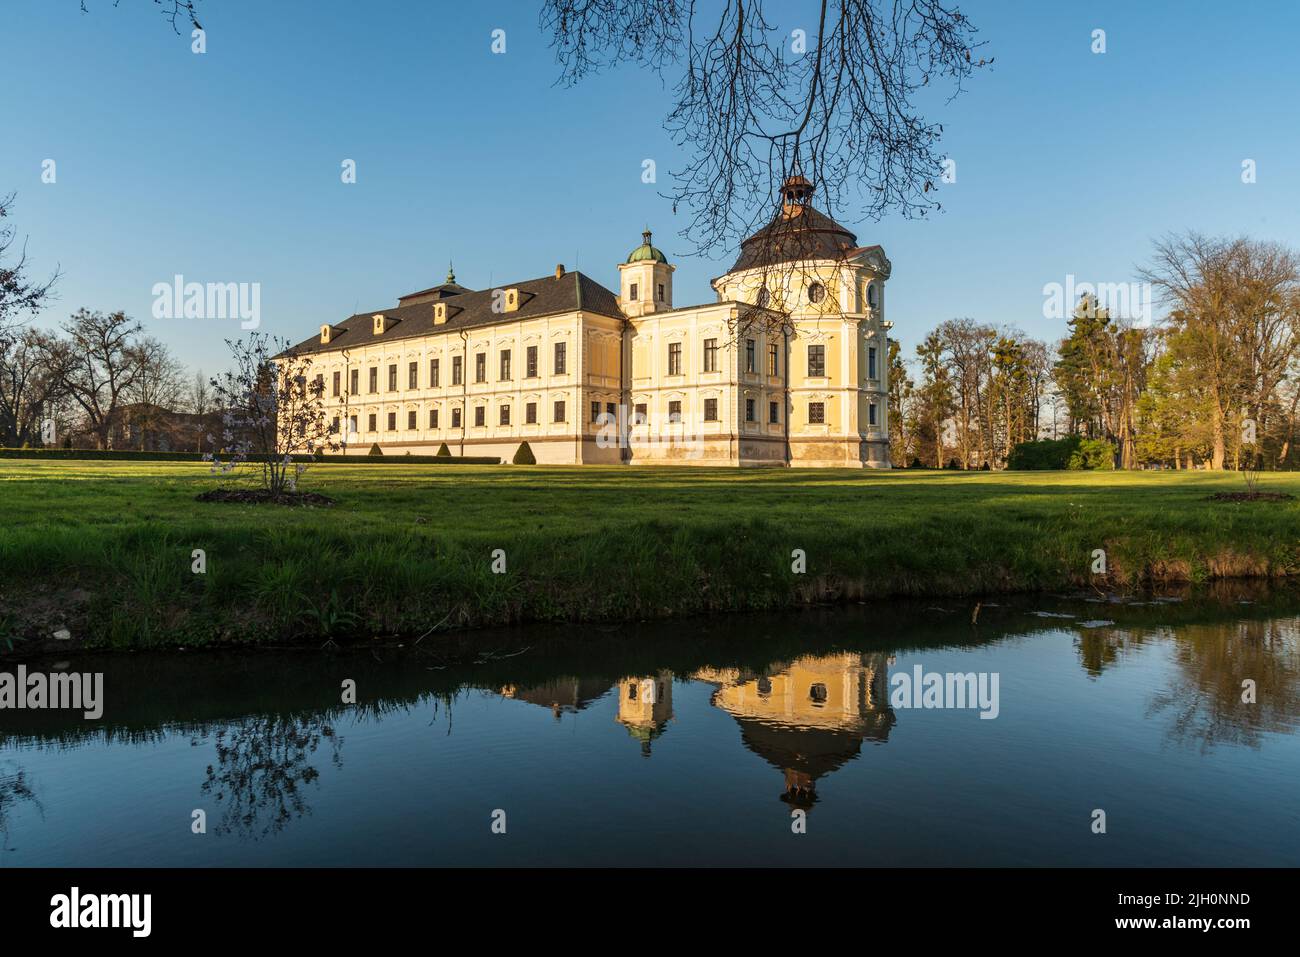 Kravare chateau in Czech republic during beautiful springtime day with clear sky Stock Photo